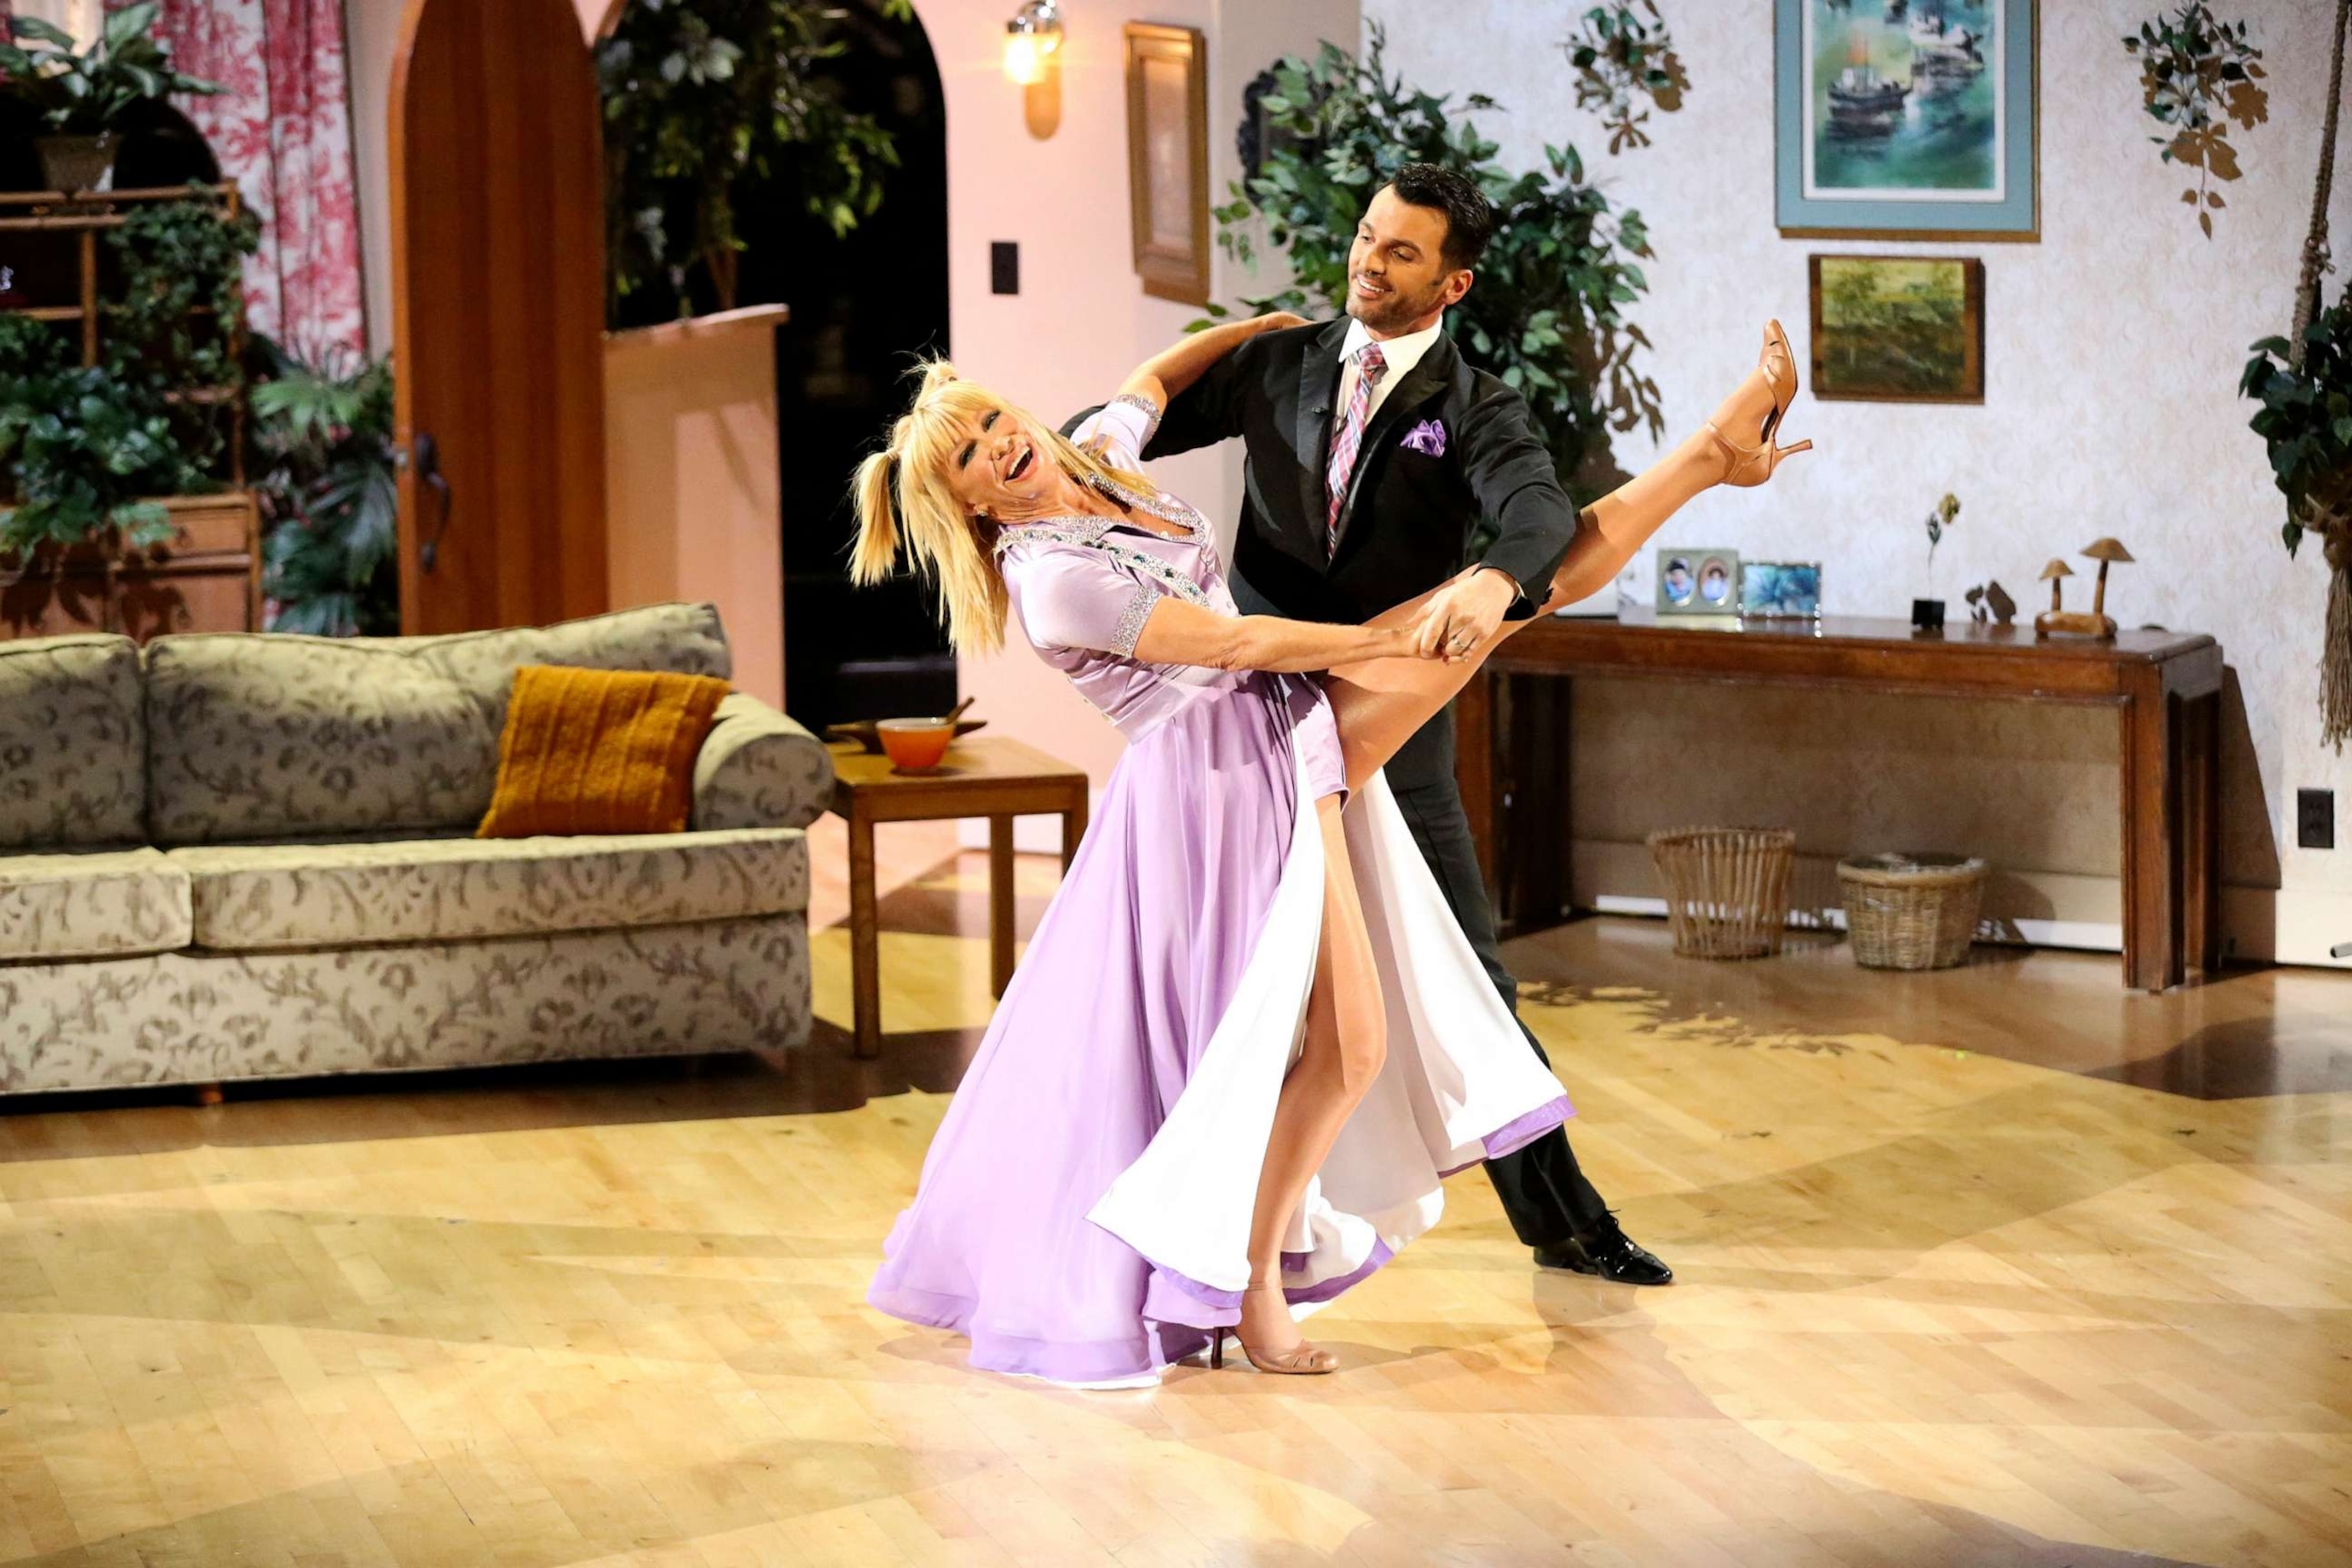 PHOTO: Suzanne Somers competes with professional dancer Tony Dovolani on "Dancing with the Stars."